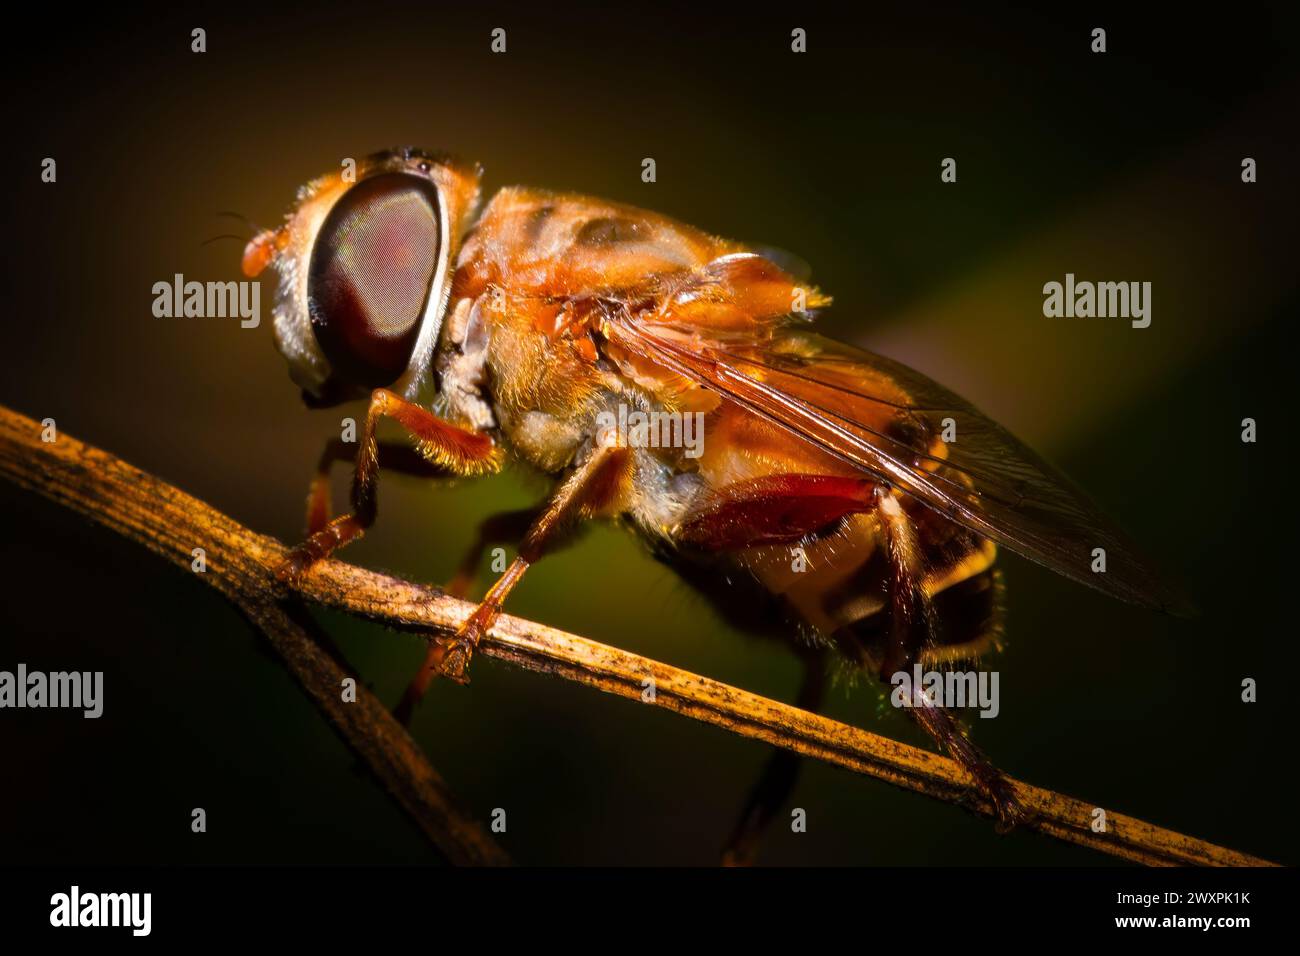 A drone fly rests for a moment on a twig before taking flight again. Stock Photo